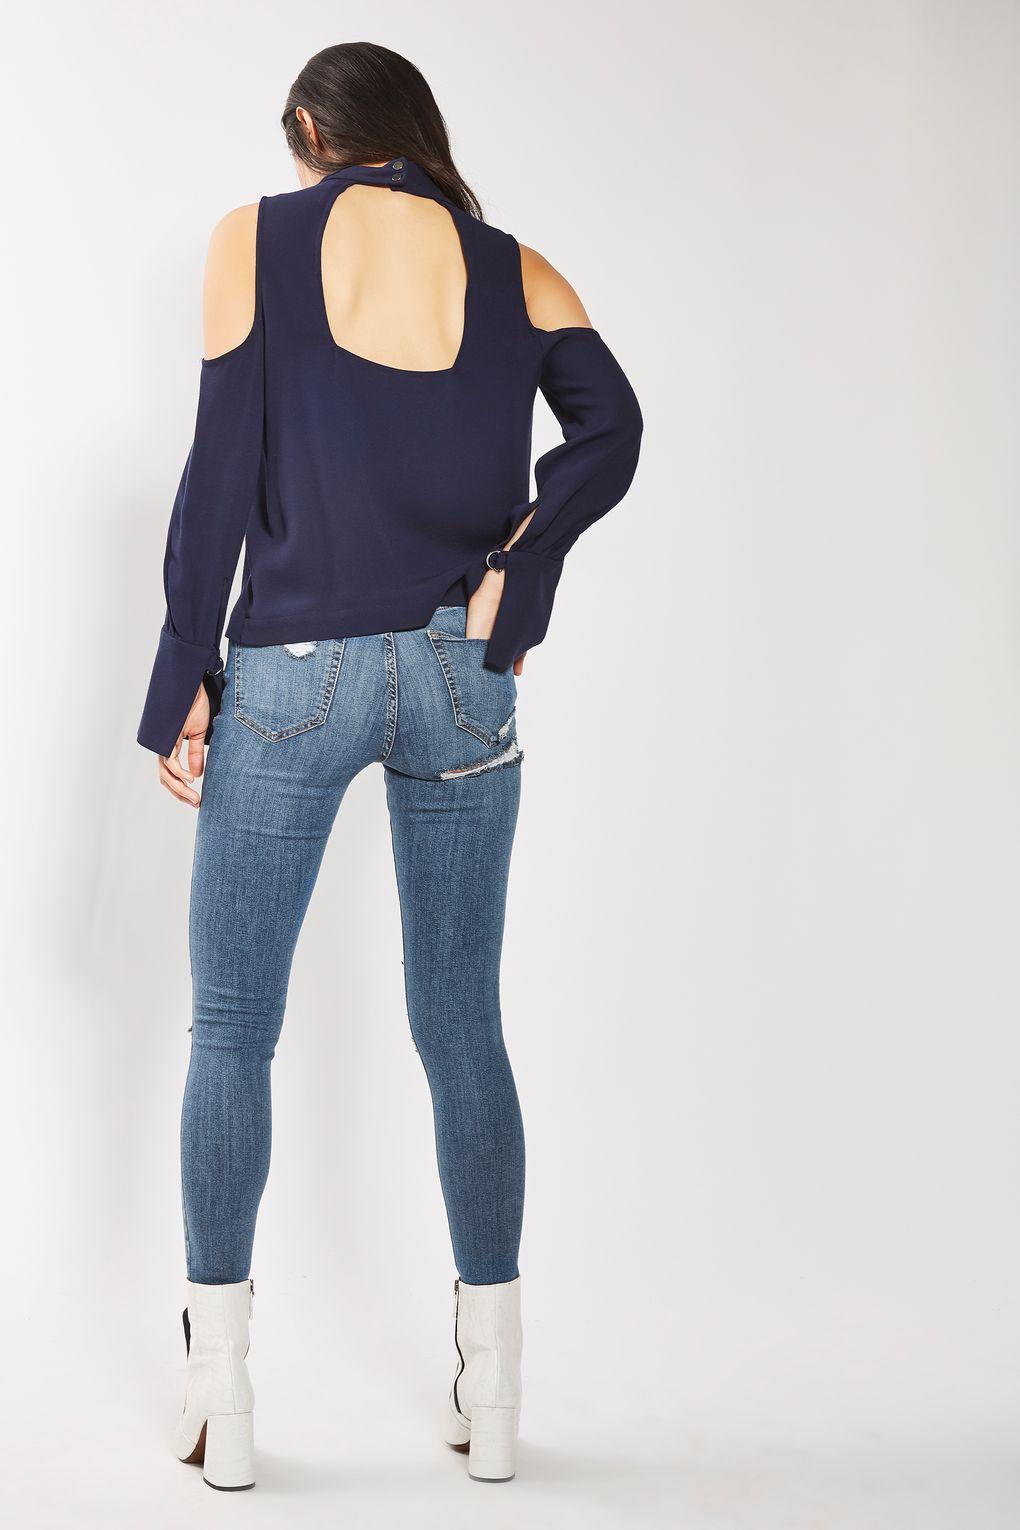 Lyst Moto Cheeky Ripped Jamie Jeans in Blue